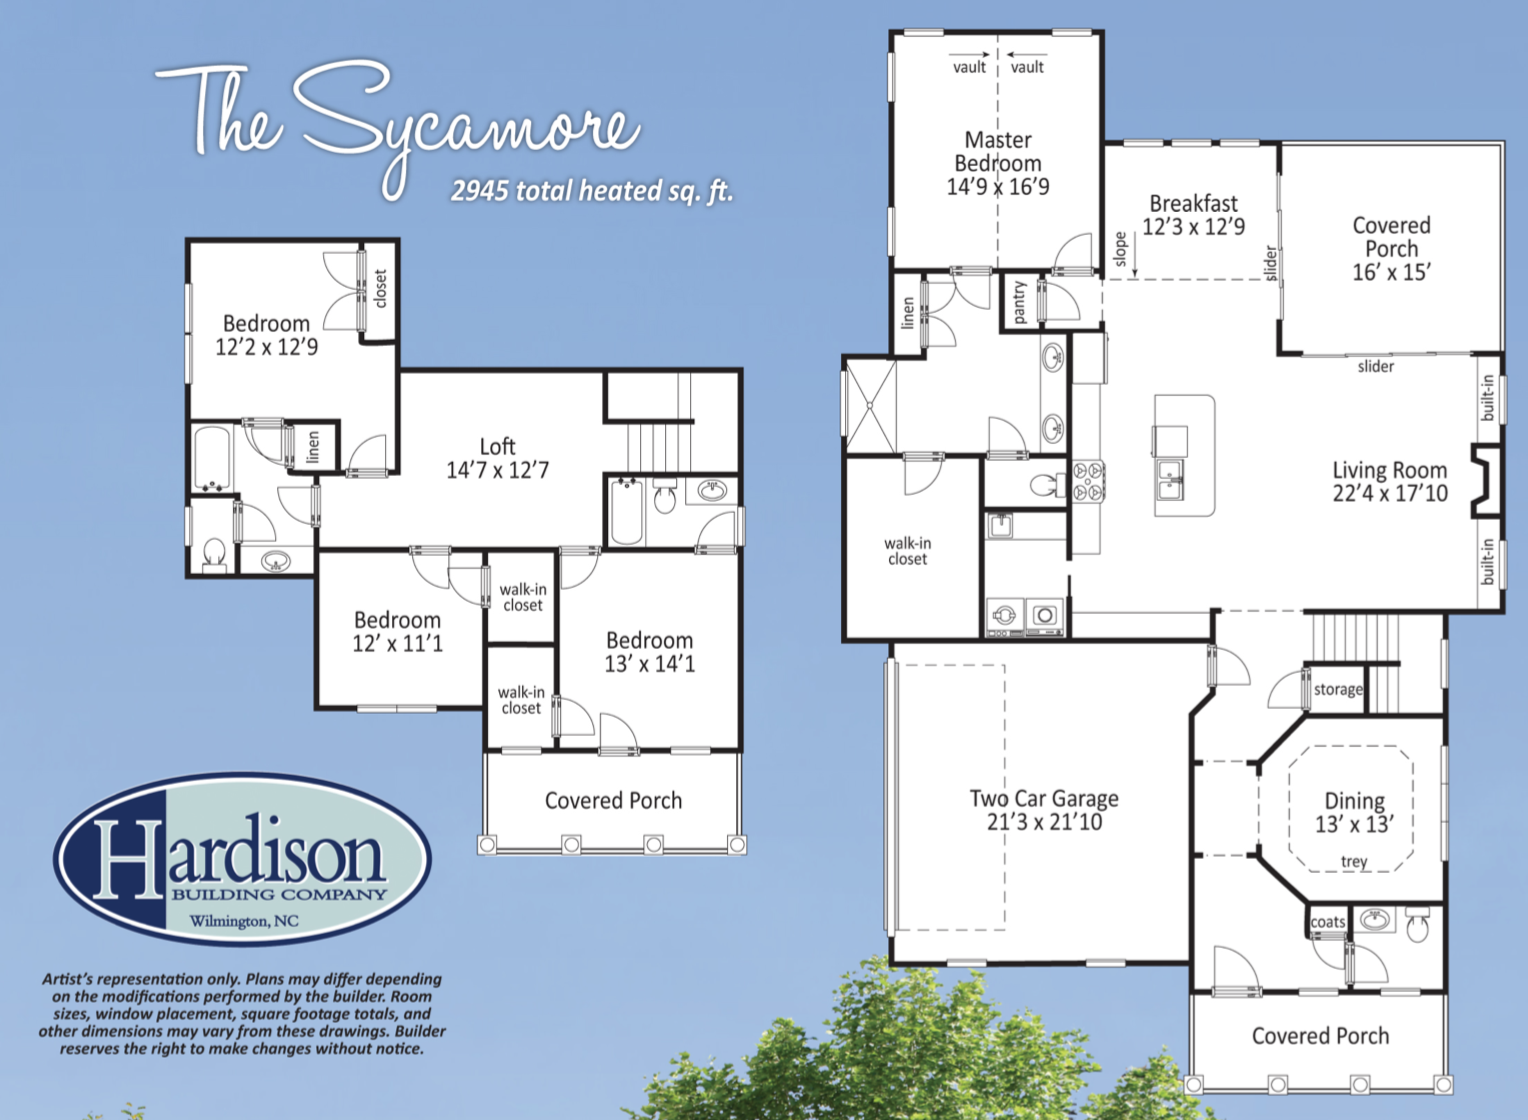 The Sycamore floor plan image